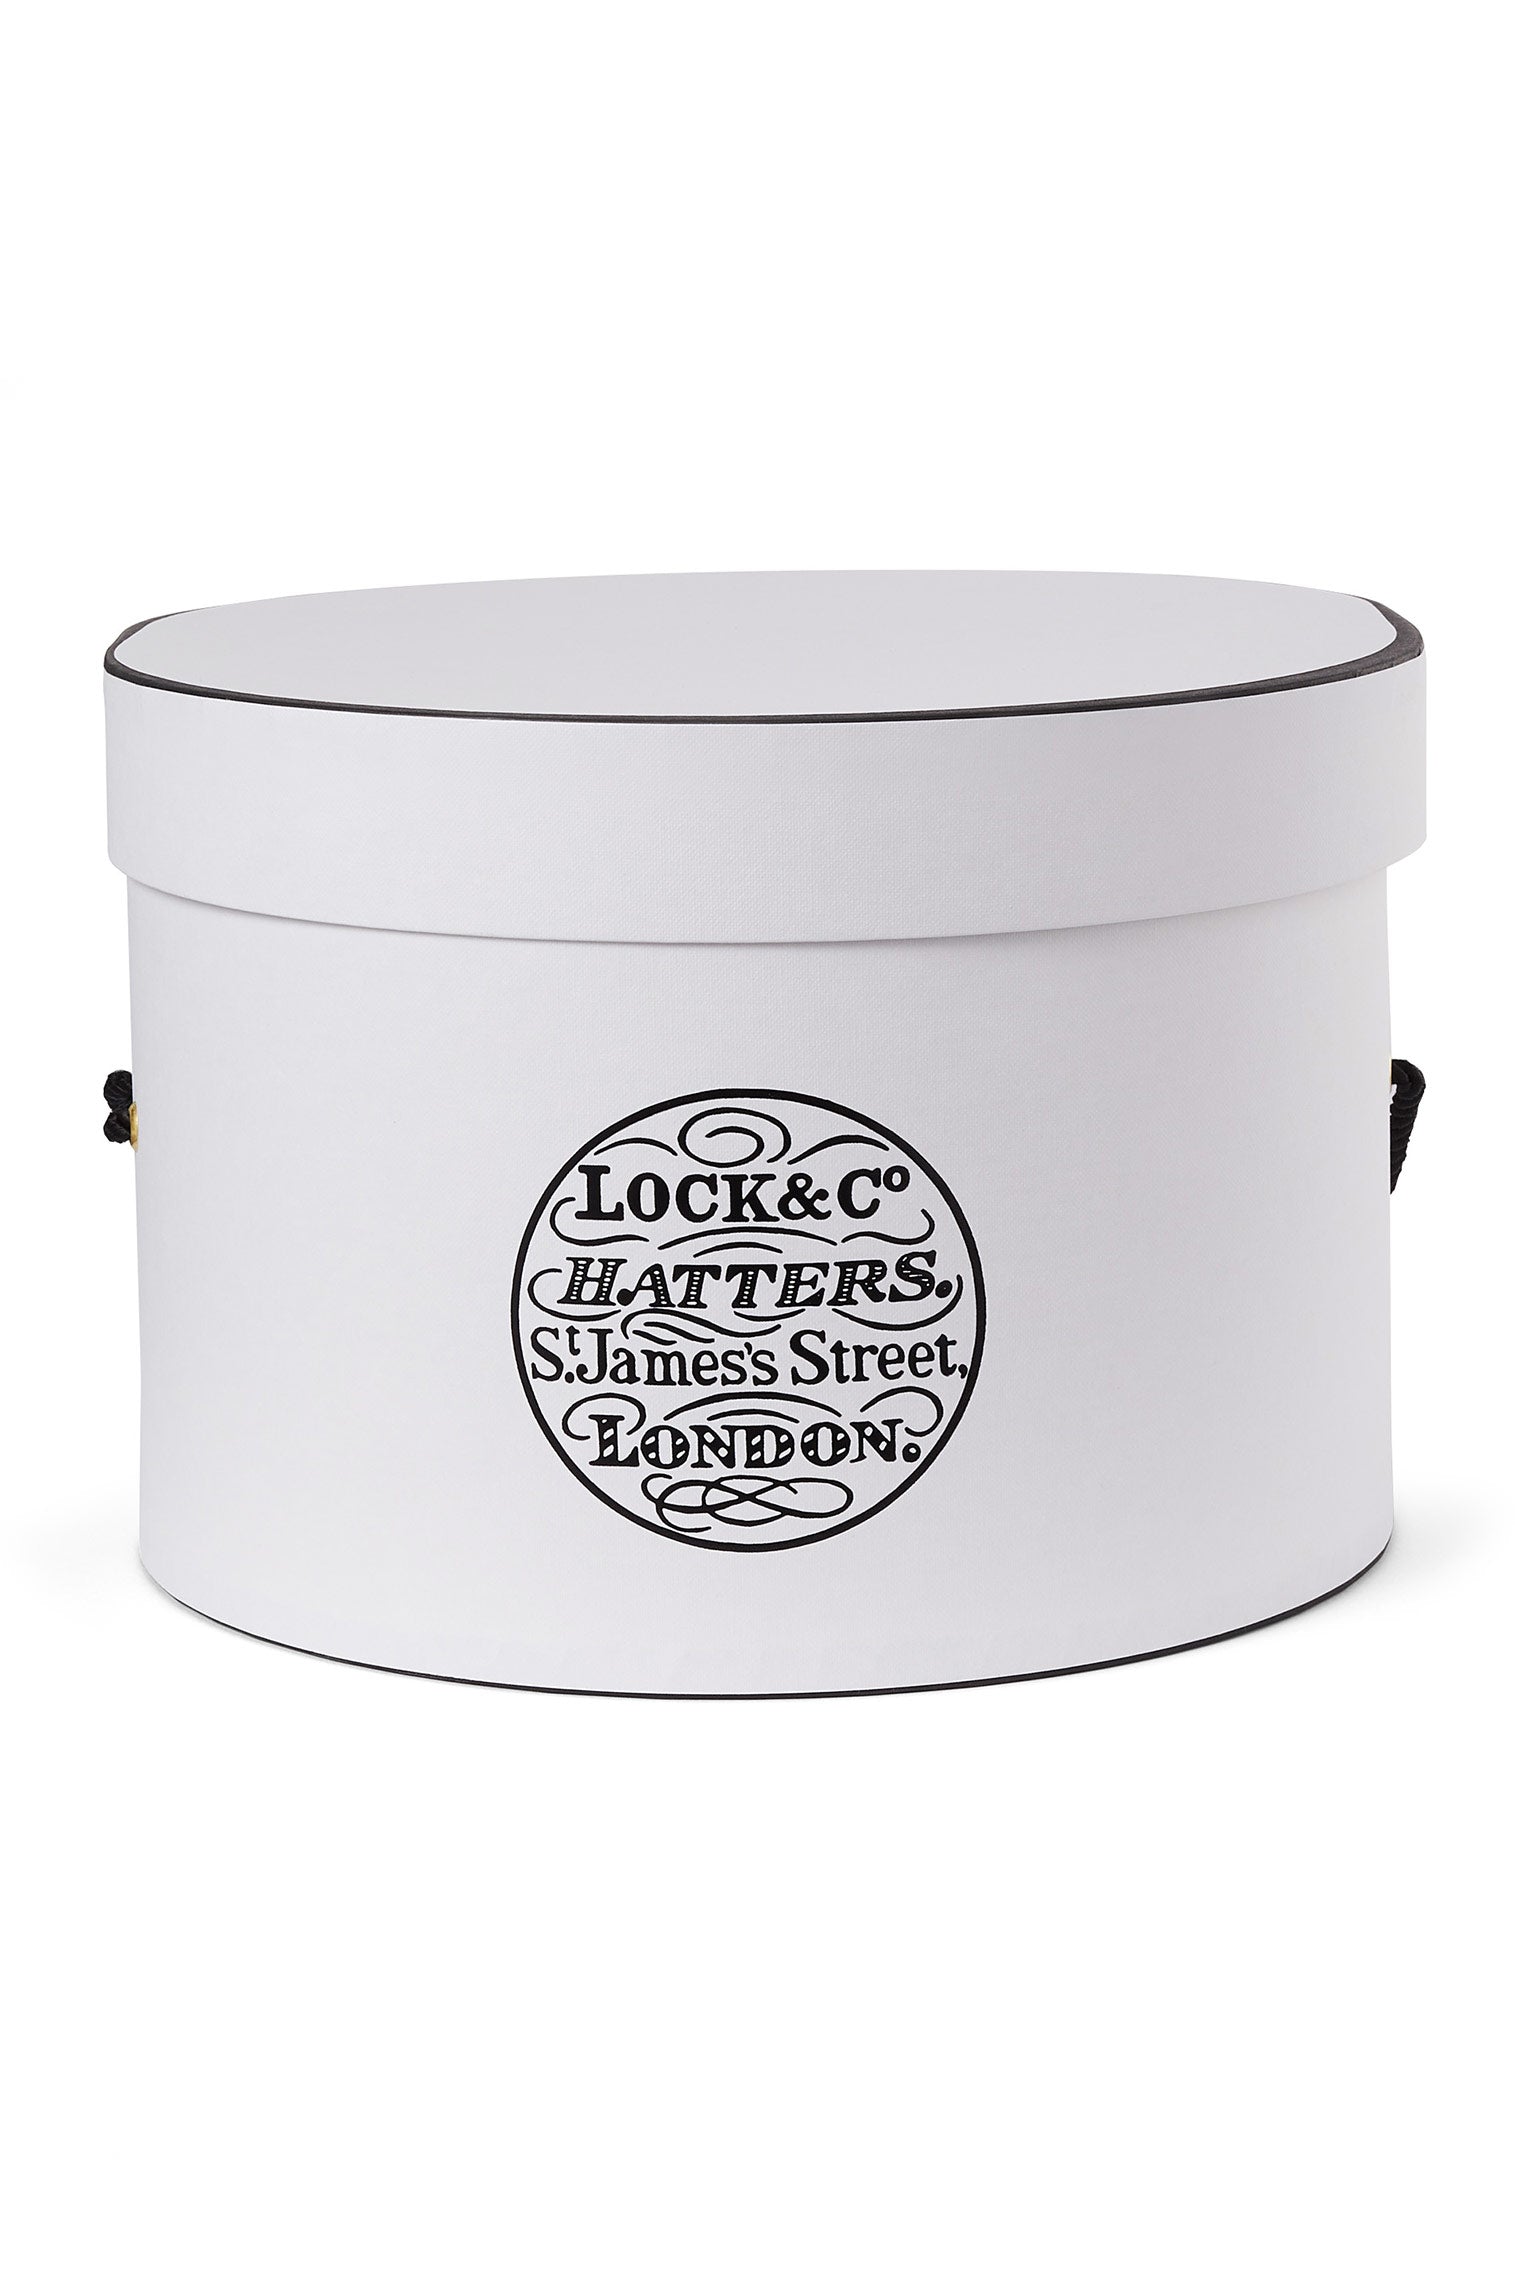 Hat Box Small - Hat Accessories - Lock & Co. Hatters London UK